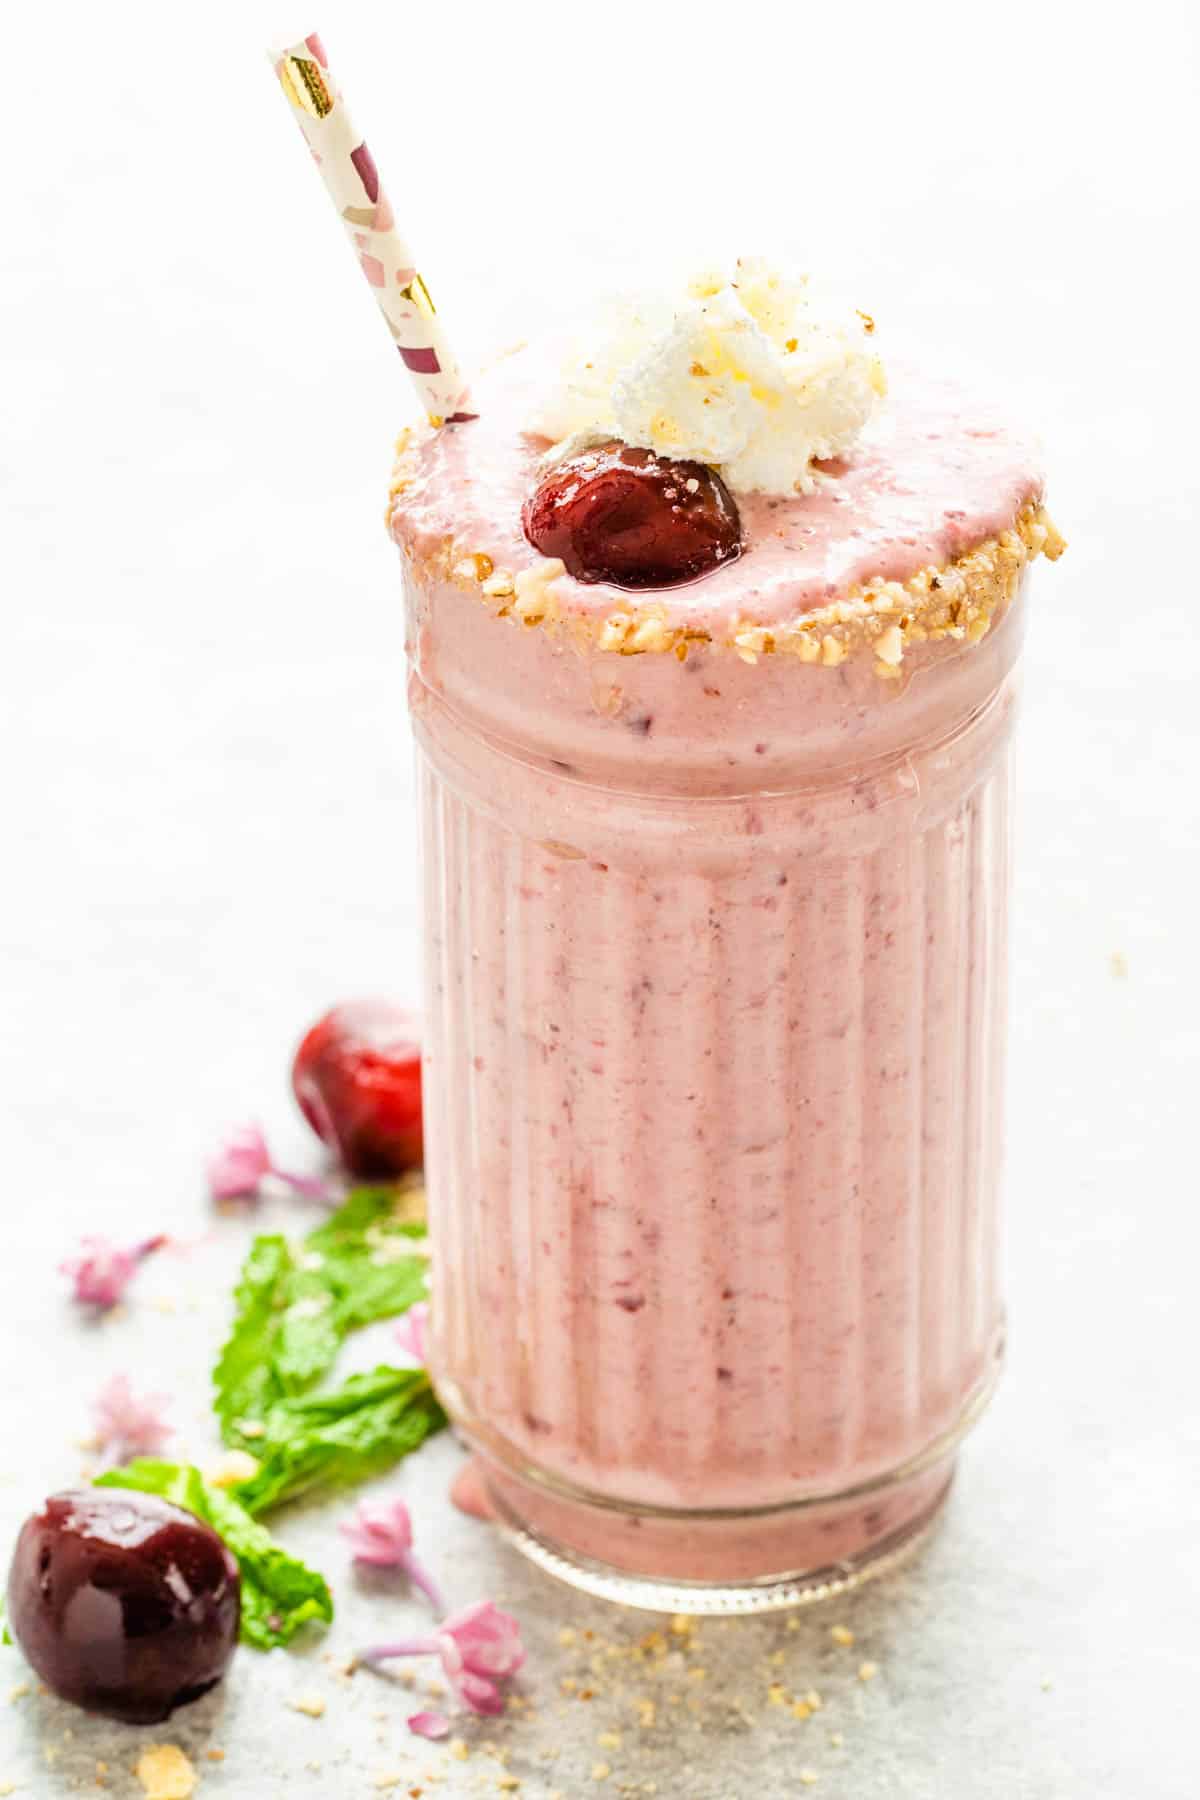 Cherry Cheesecake Smoothie with whipped cream and a cherry.